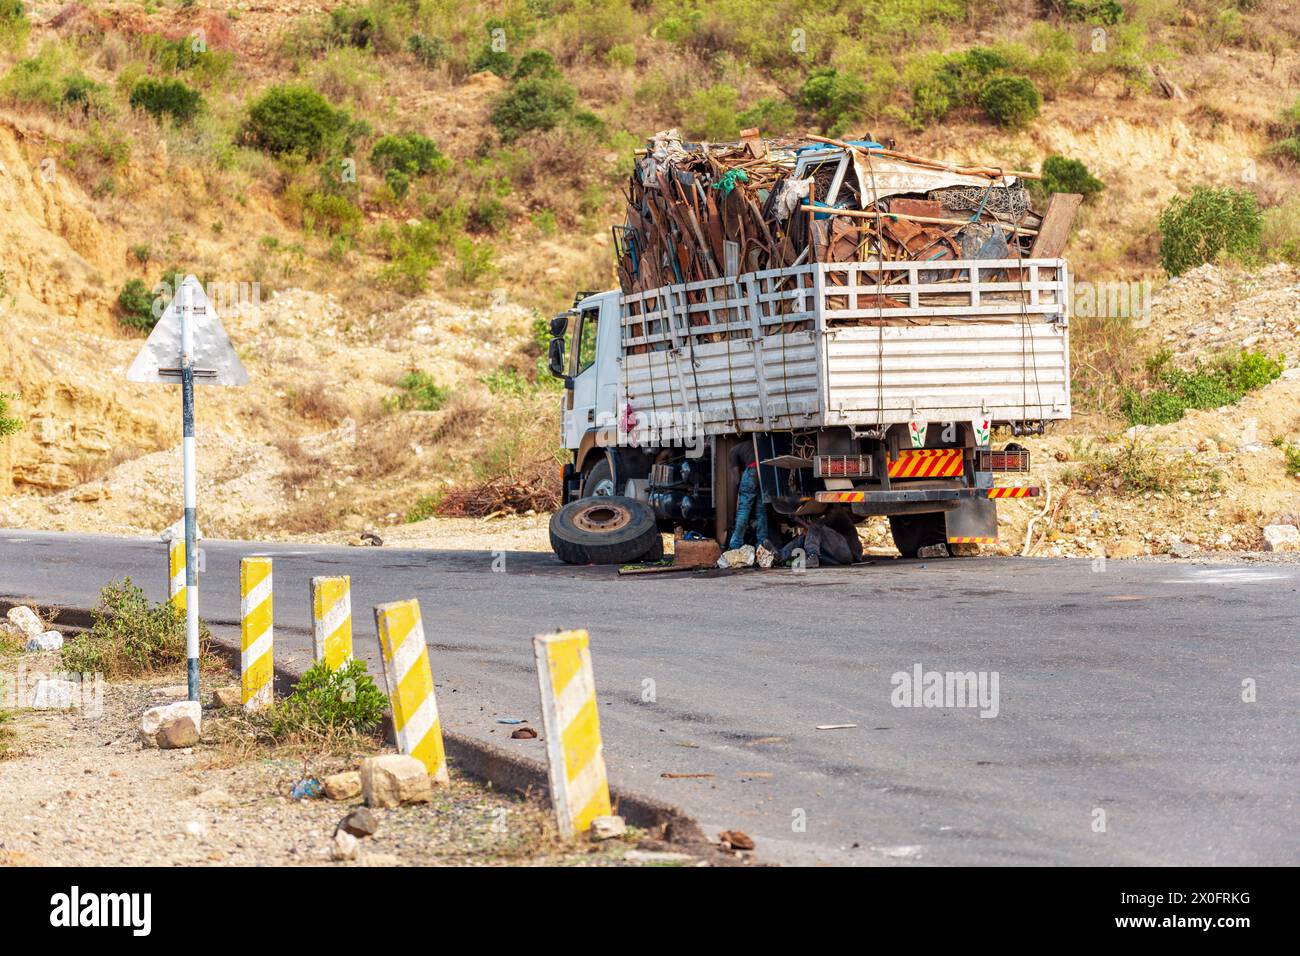 Damaged old truck by the road. A trucks wheel fell off. A common view of transportation in Ethiopia. Oromia Region. Ethiopia Stock Photo